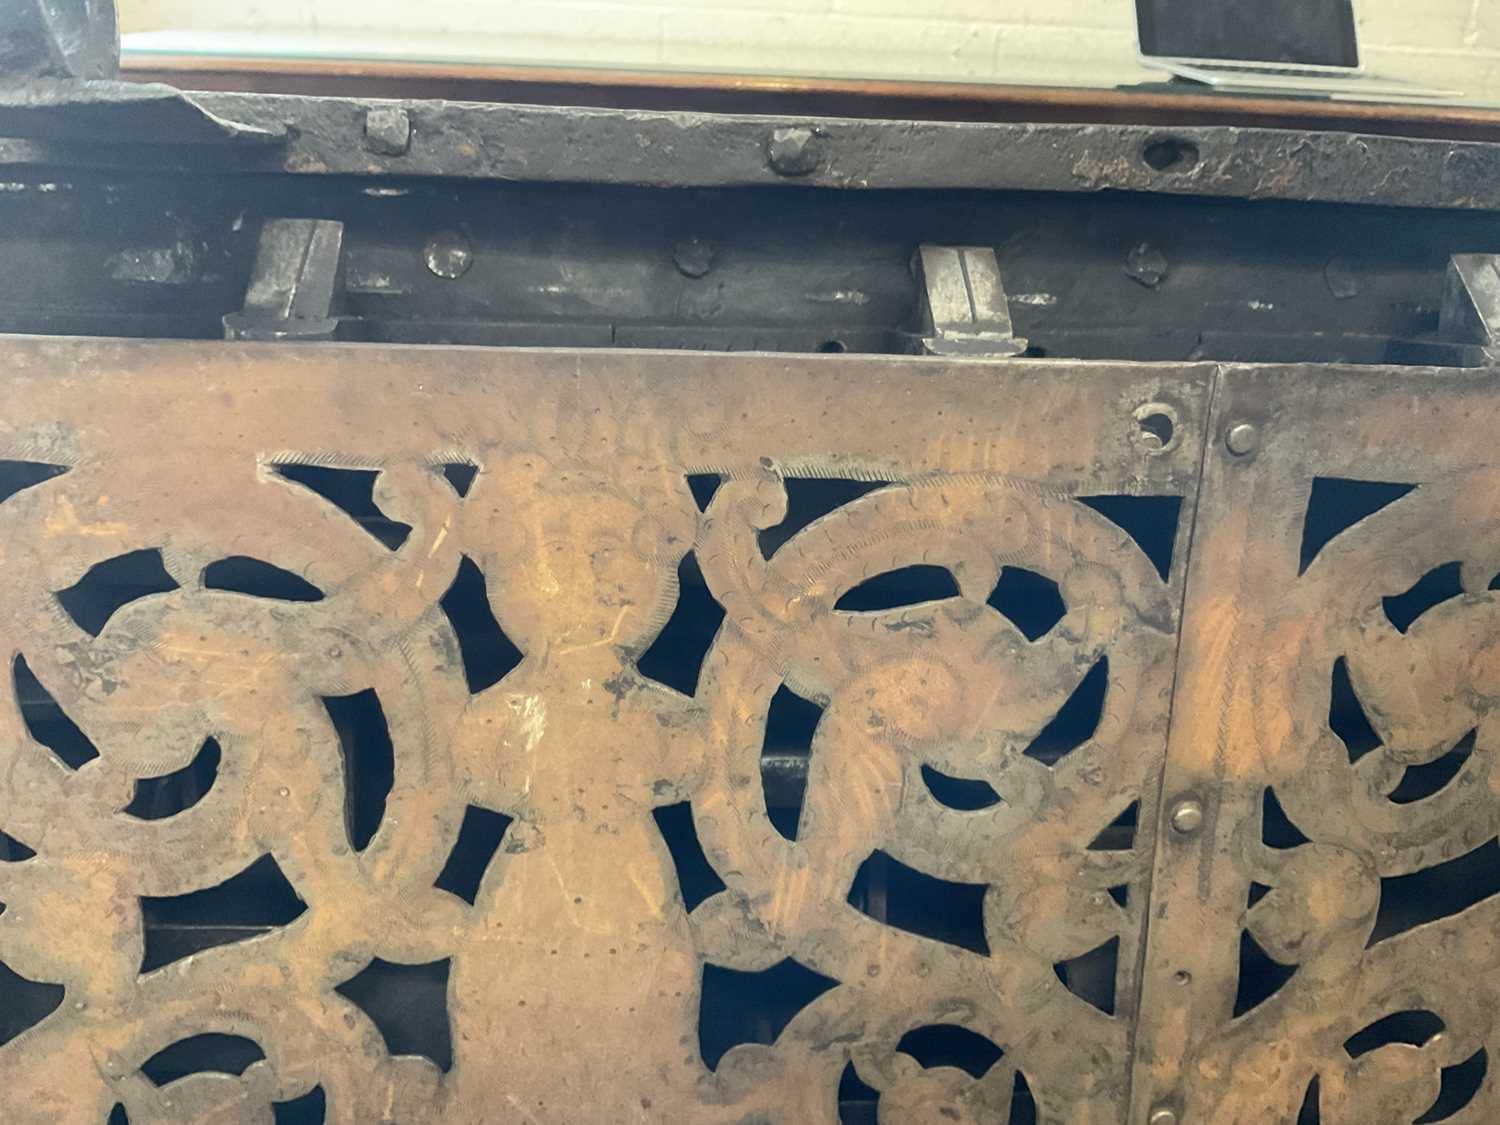 17th century German iron Armada chest with intricate locking system, key marked S. Morden - Image 19 of 23